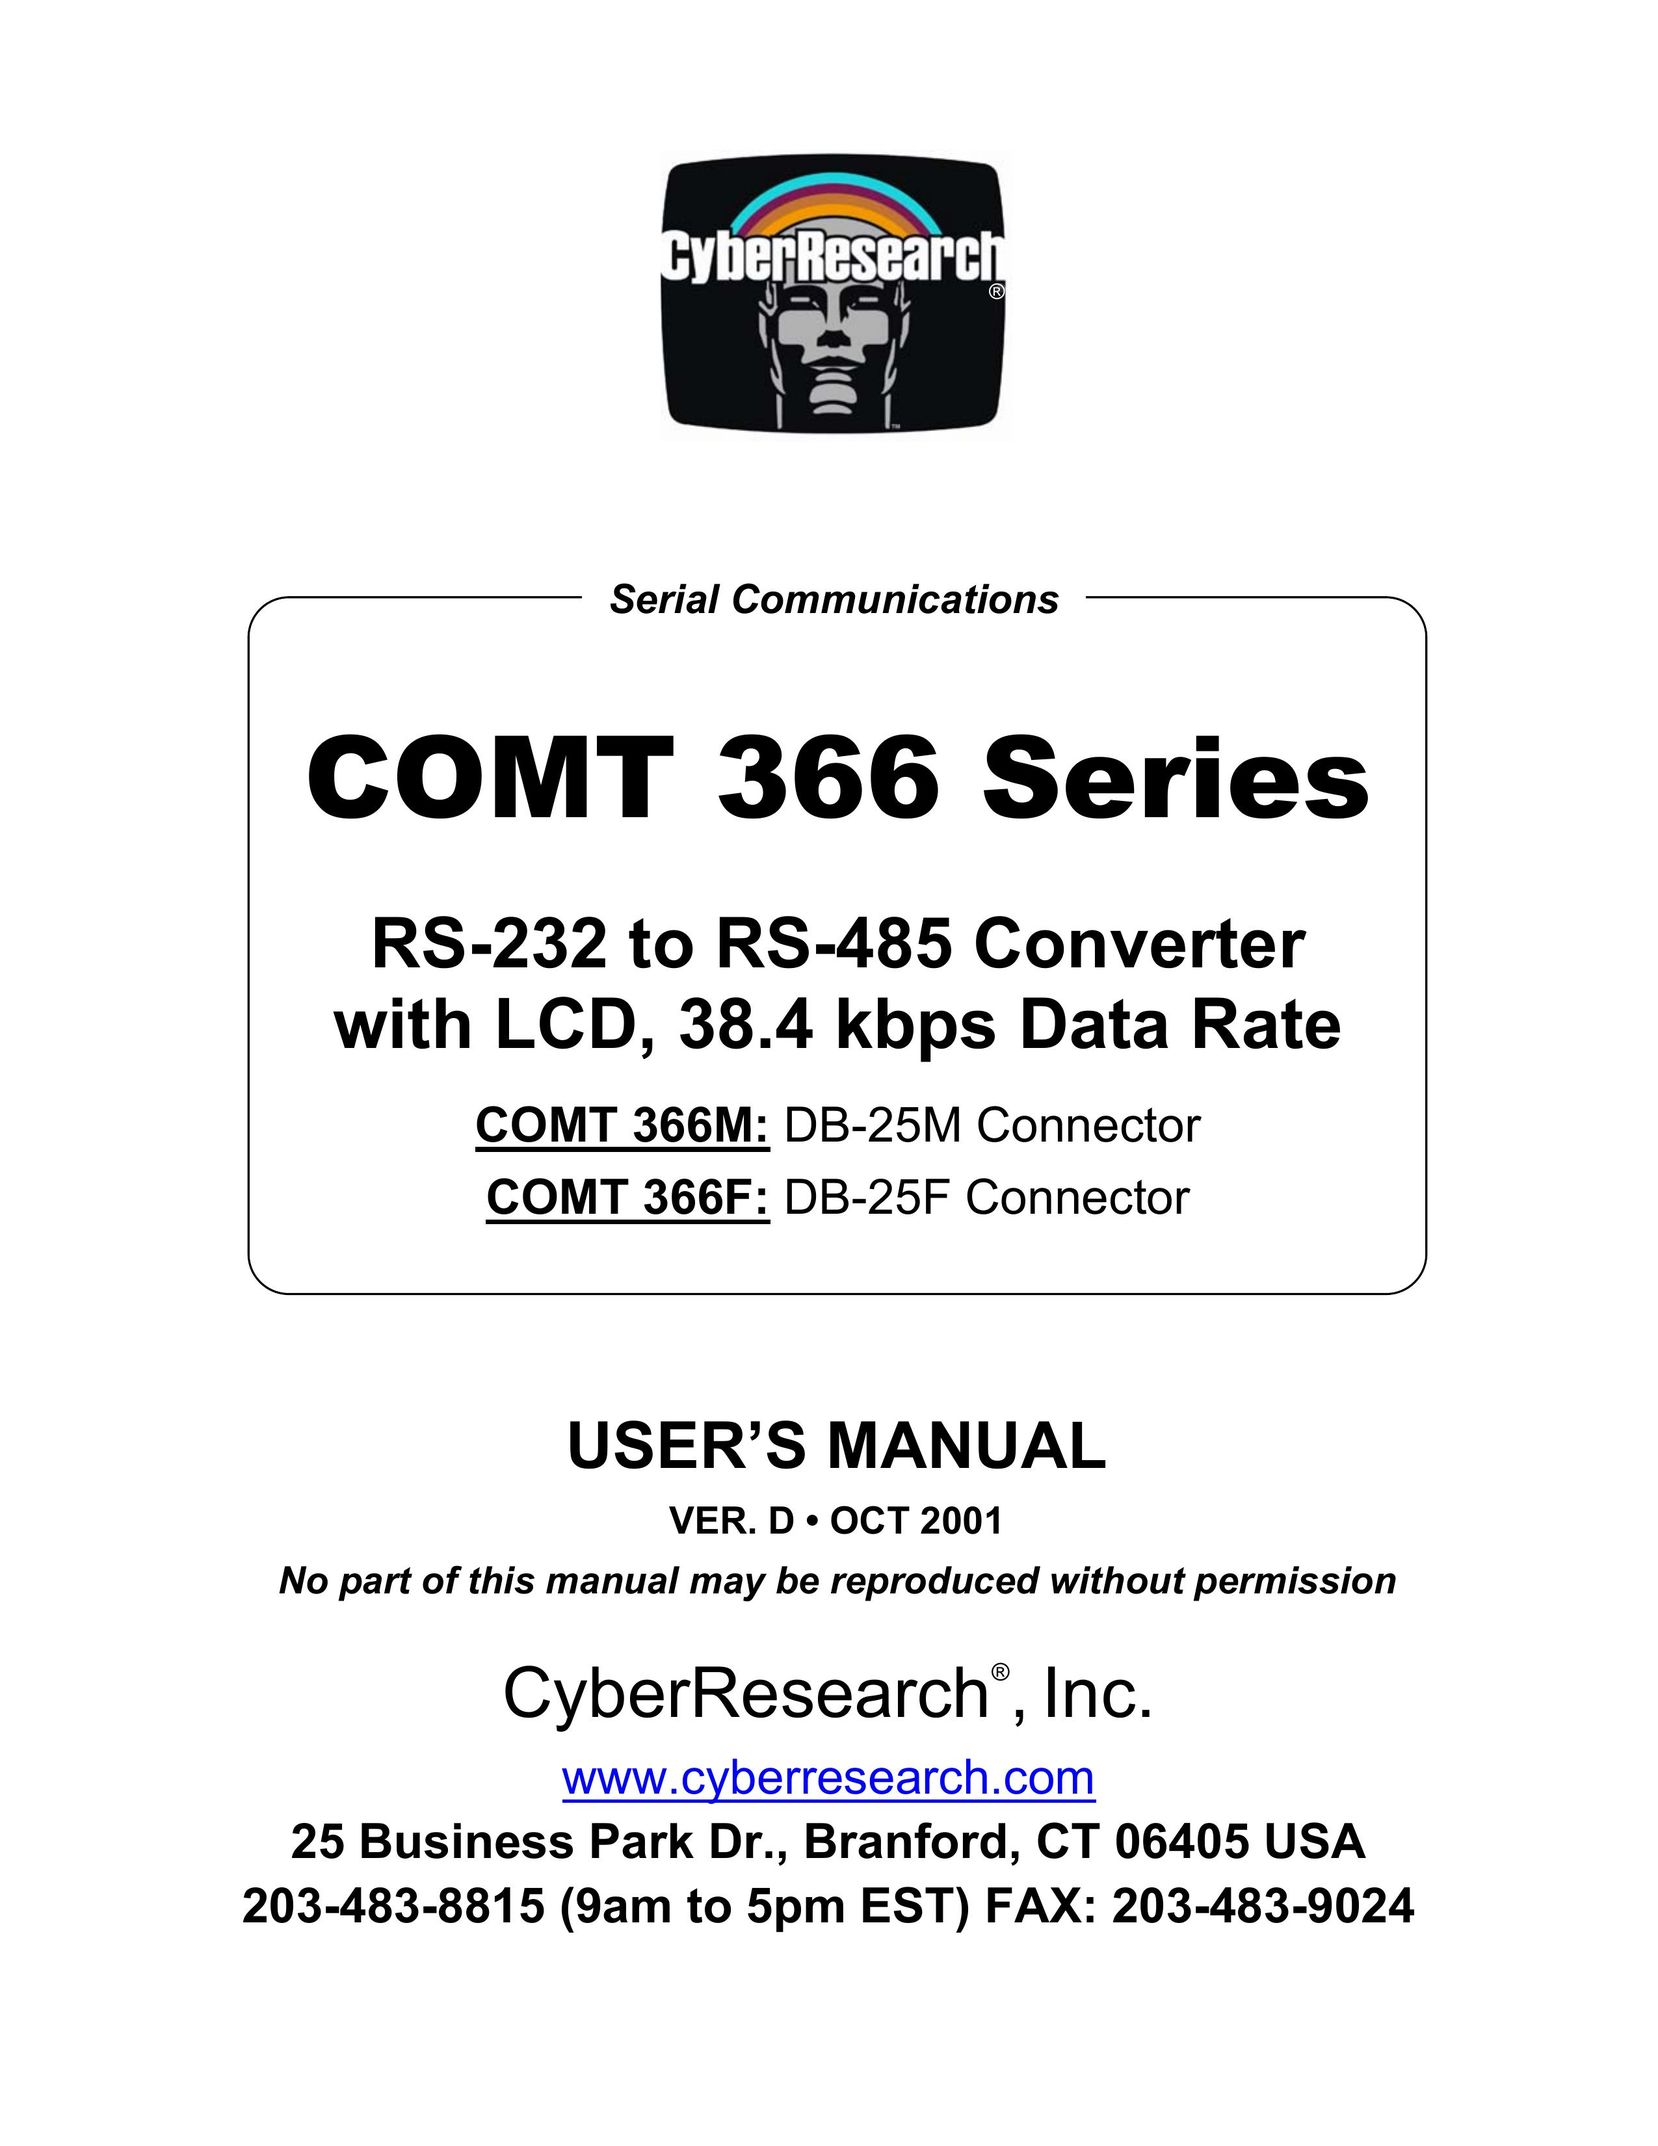 CyberResearch RS-232 Power Supply User Manual